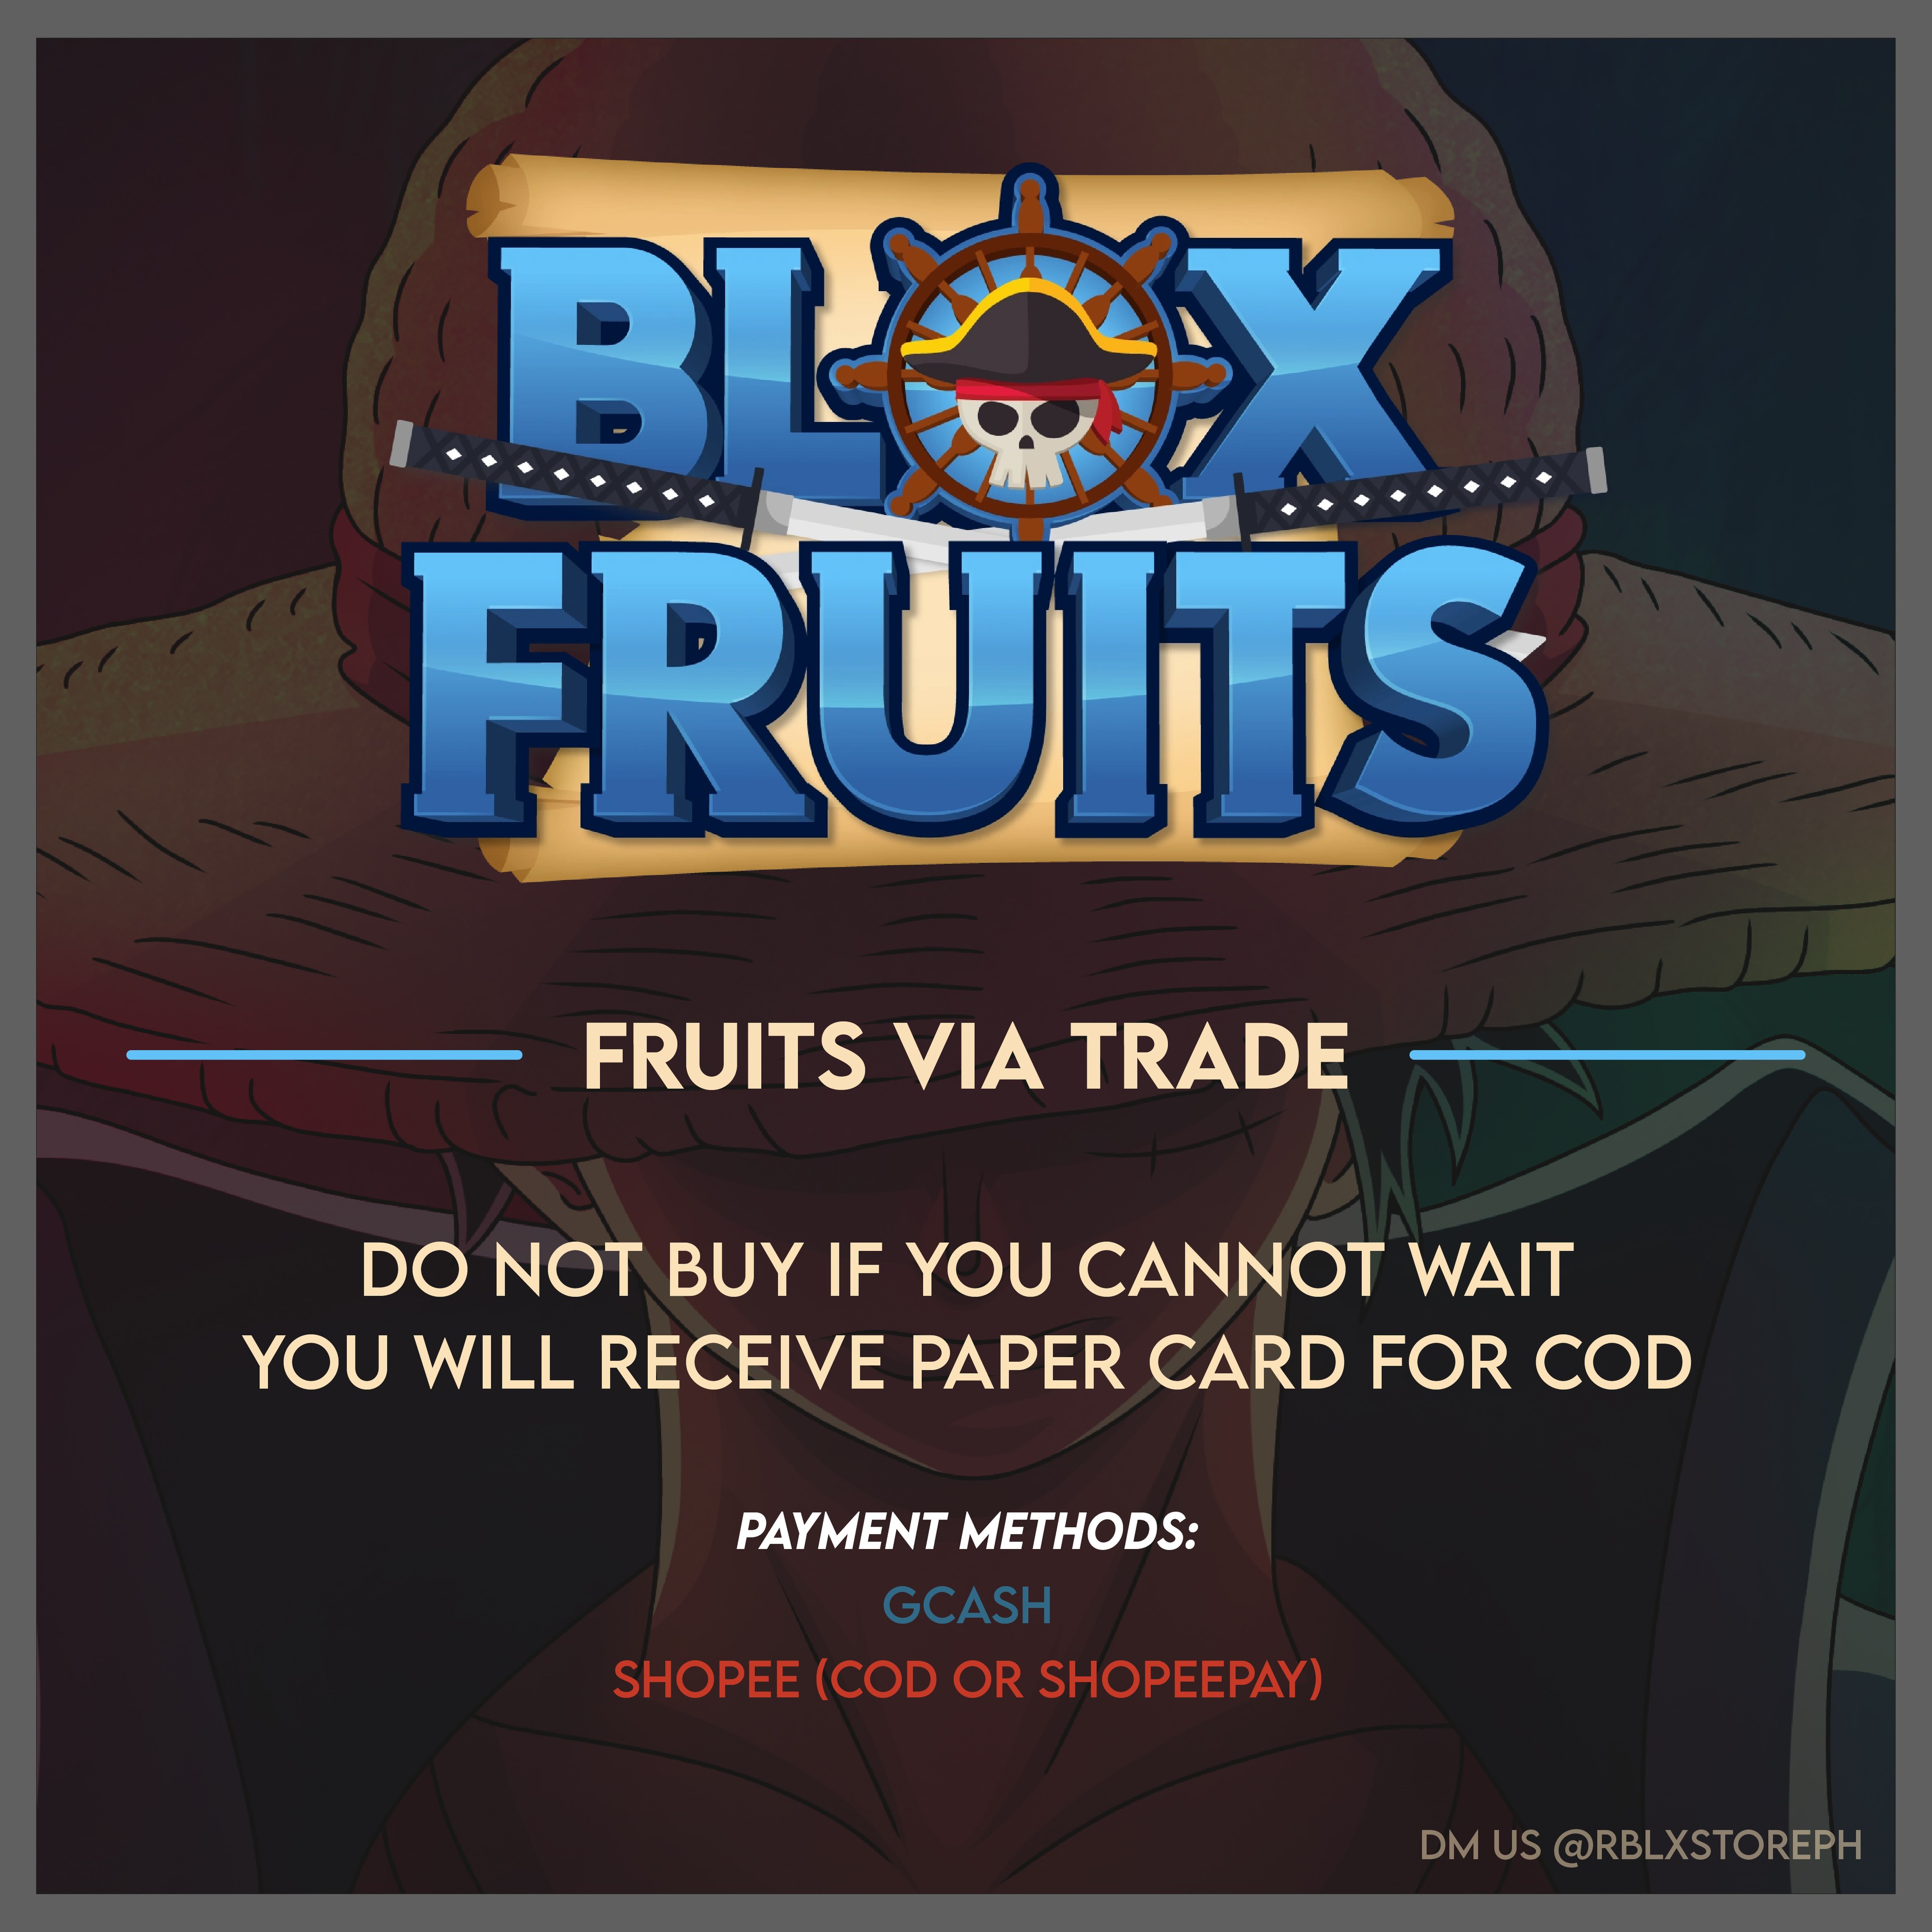 Trade Blox Fruits Roblox: How To Trade In Blox Fruits On Roblox